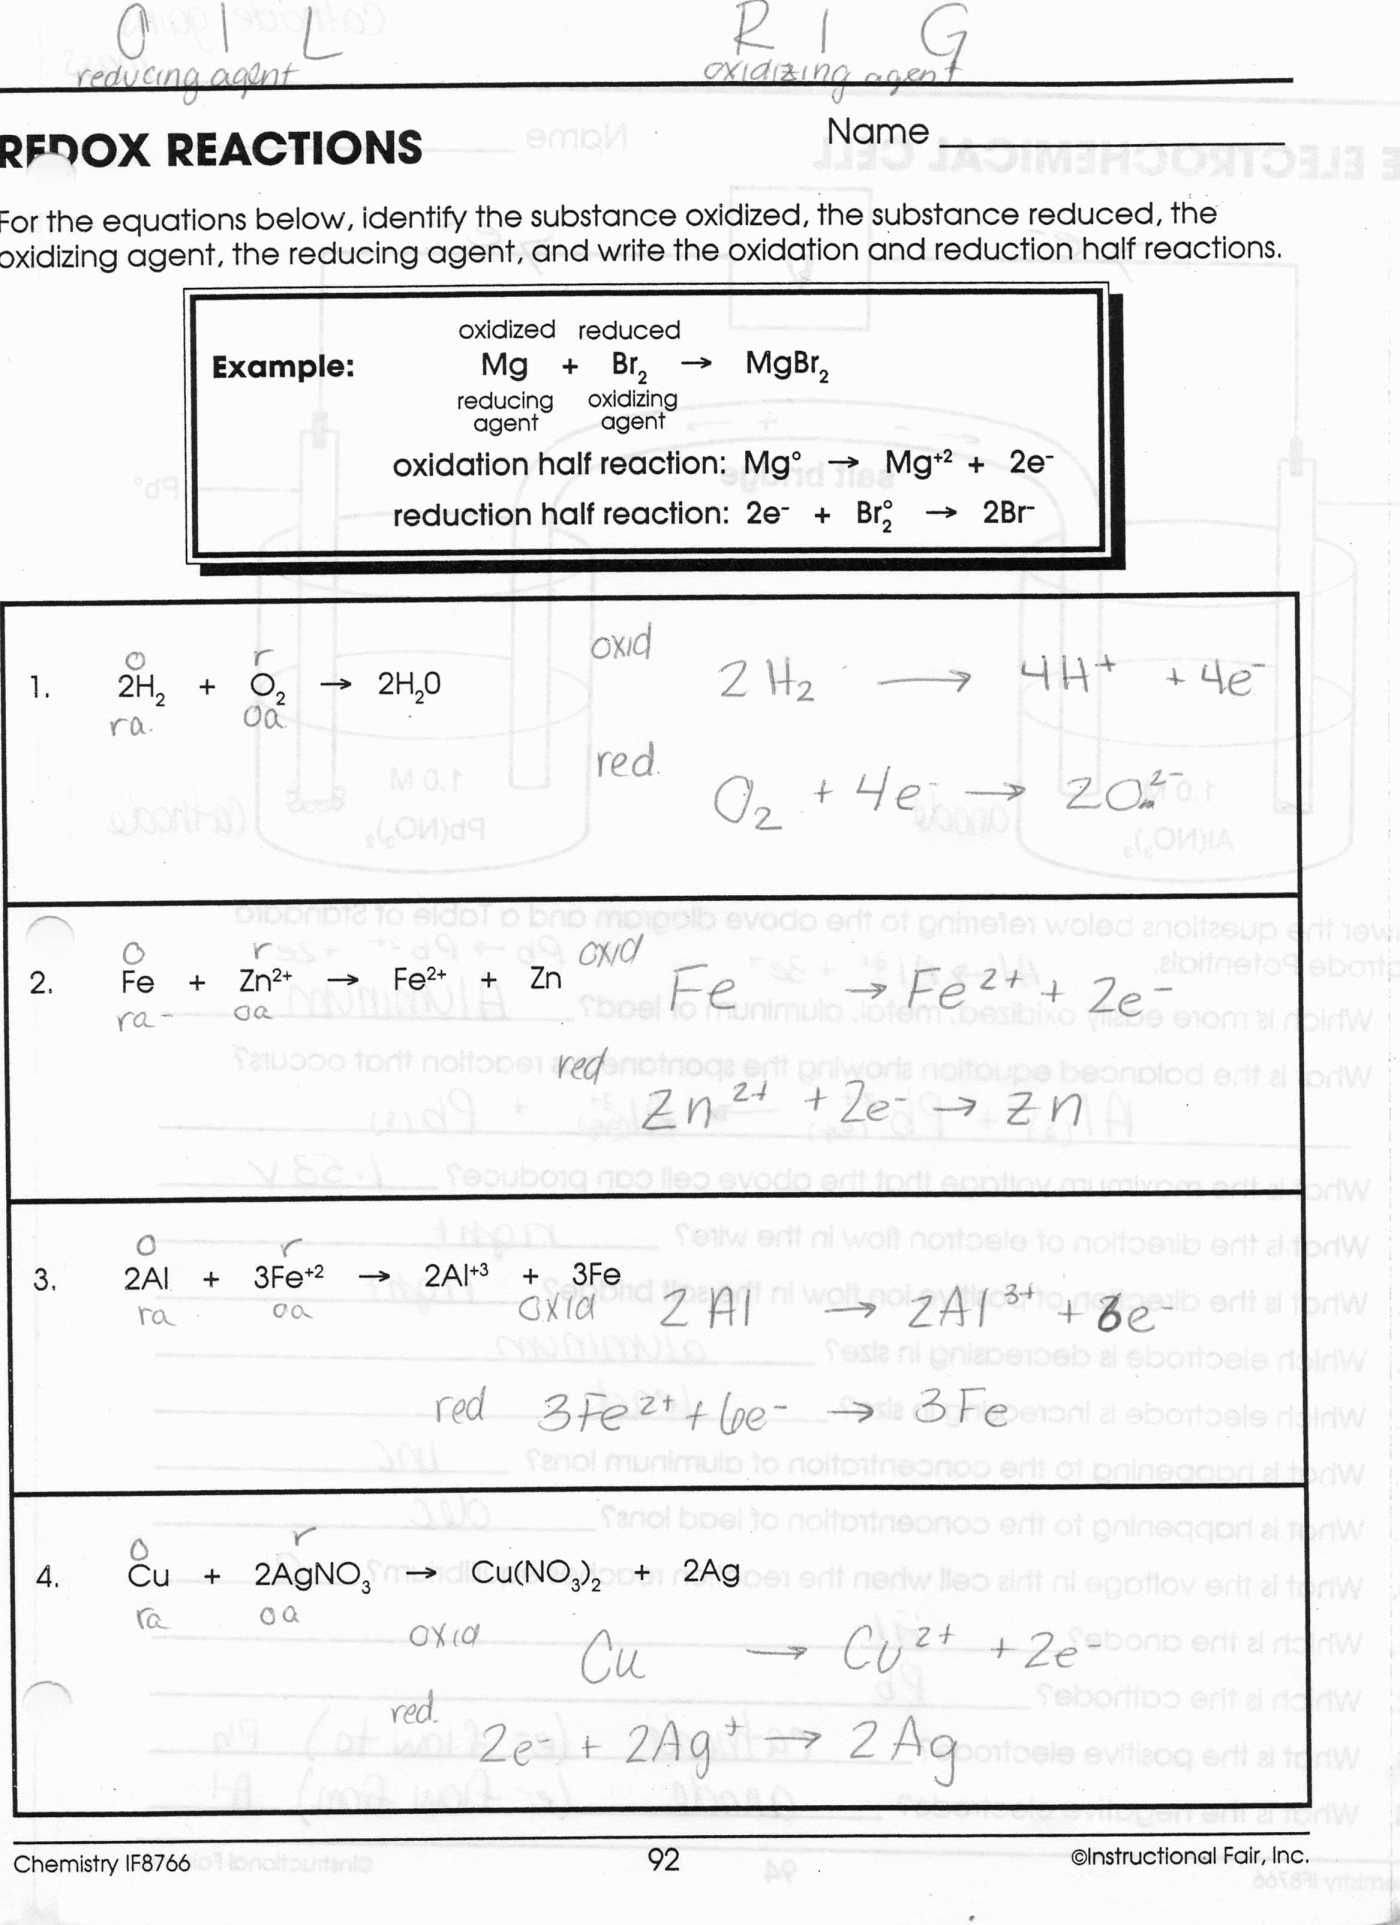 Worksheet Chemical Bonding Ionic And Covalent Answers Regarding Worksheet Chemical Bonding Ionic And Covalent Answers